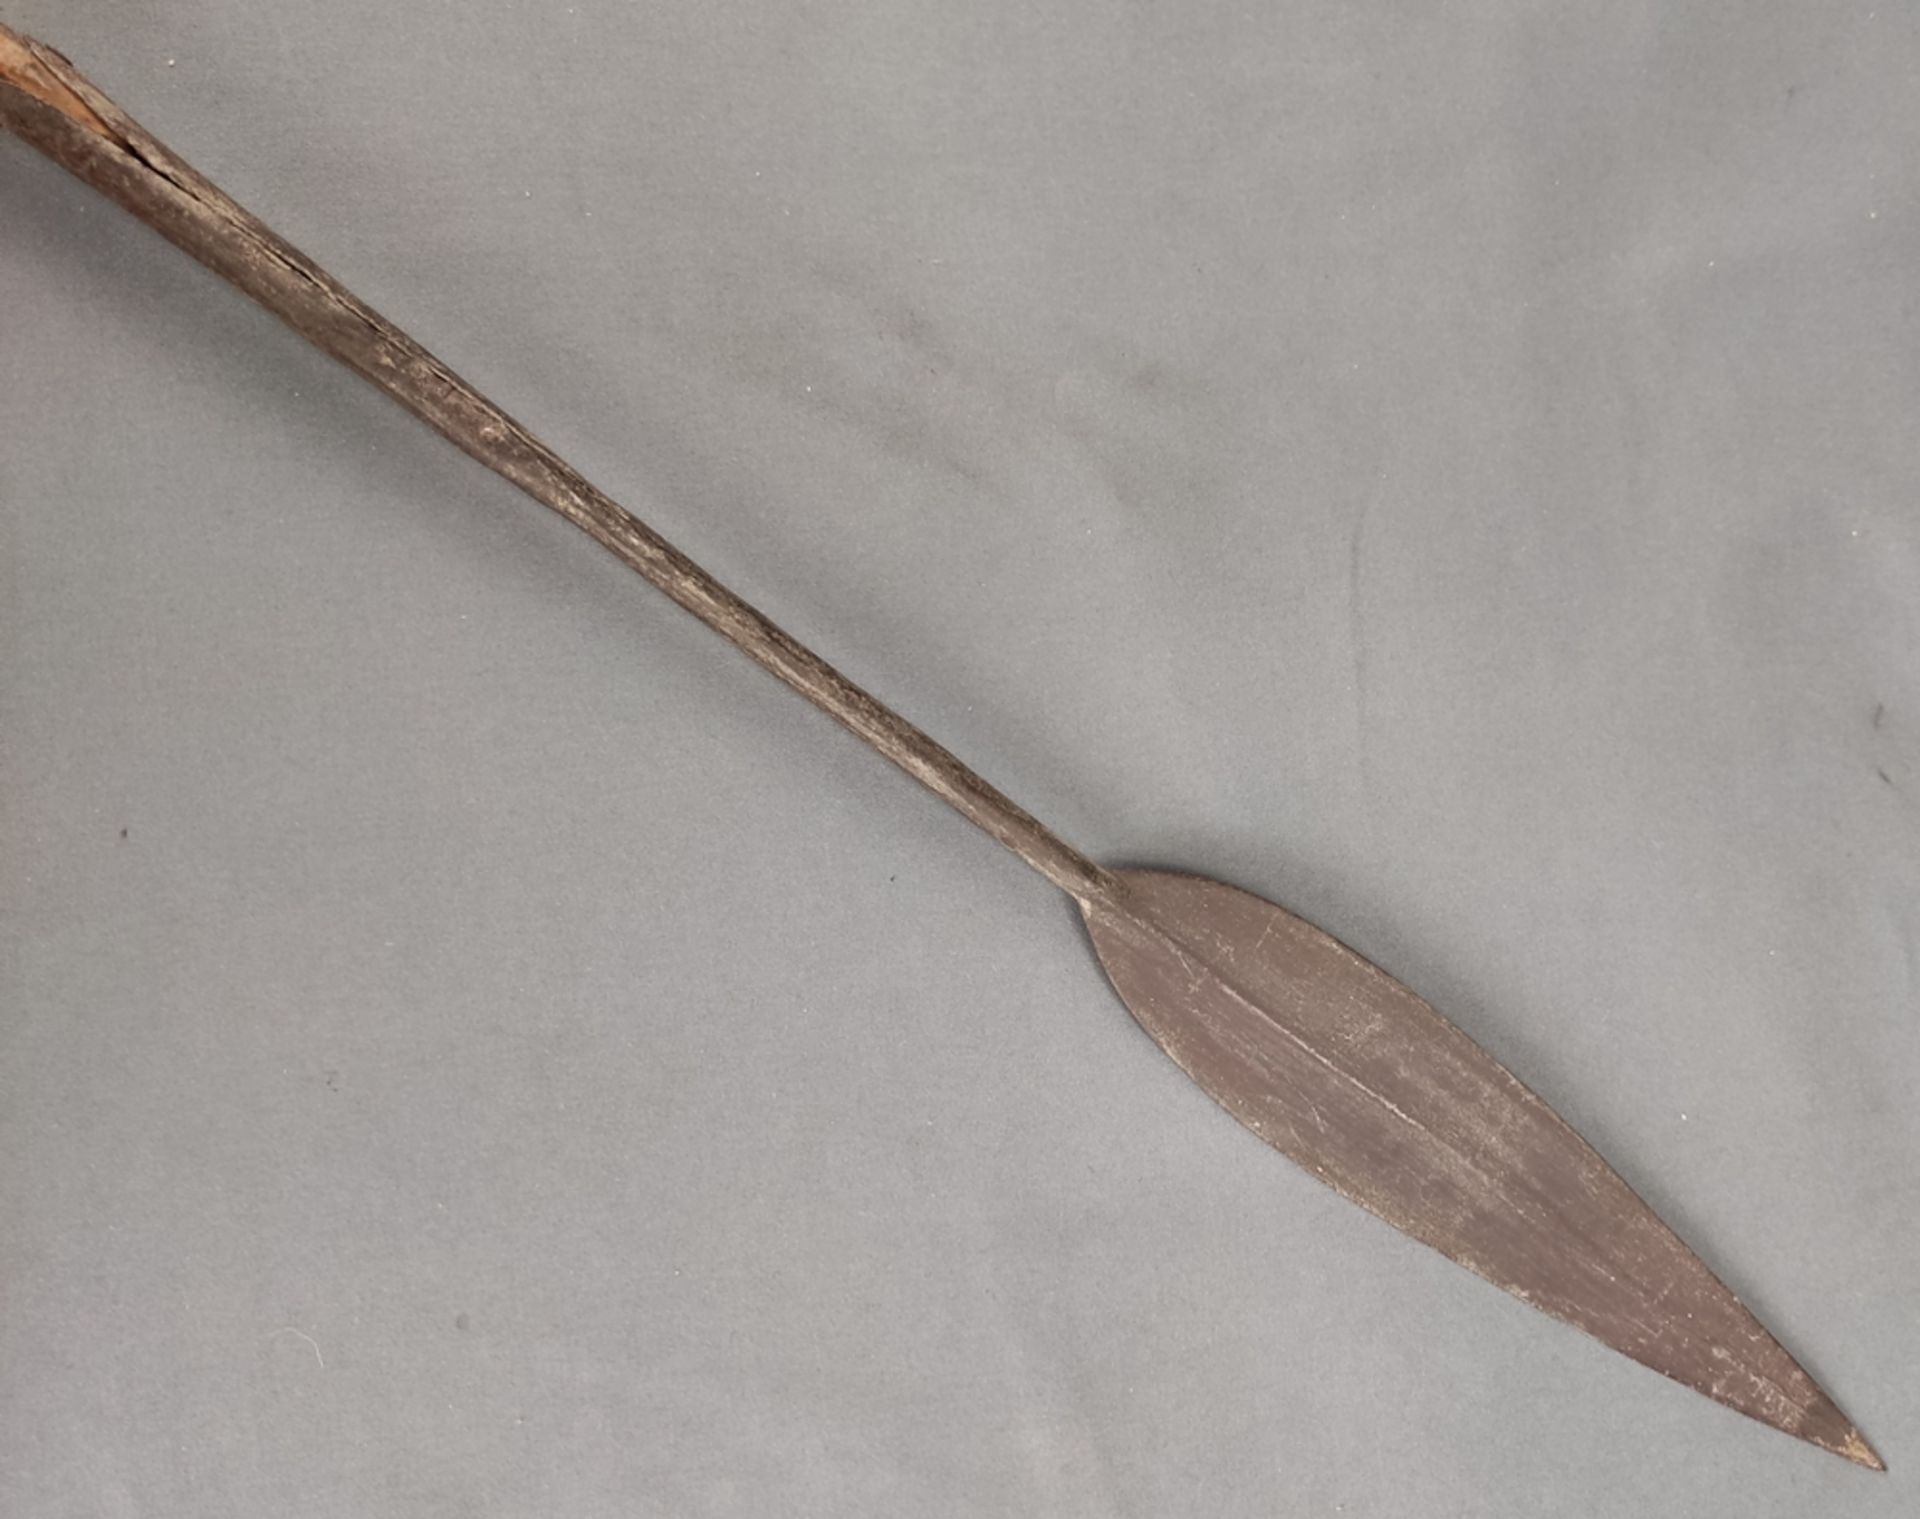 Spear with metal tip, middle part made of wood, lower part made of metal, decoration with hair,